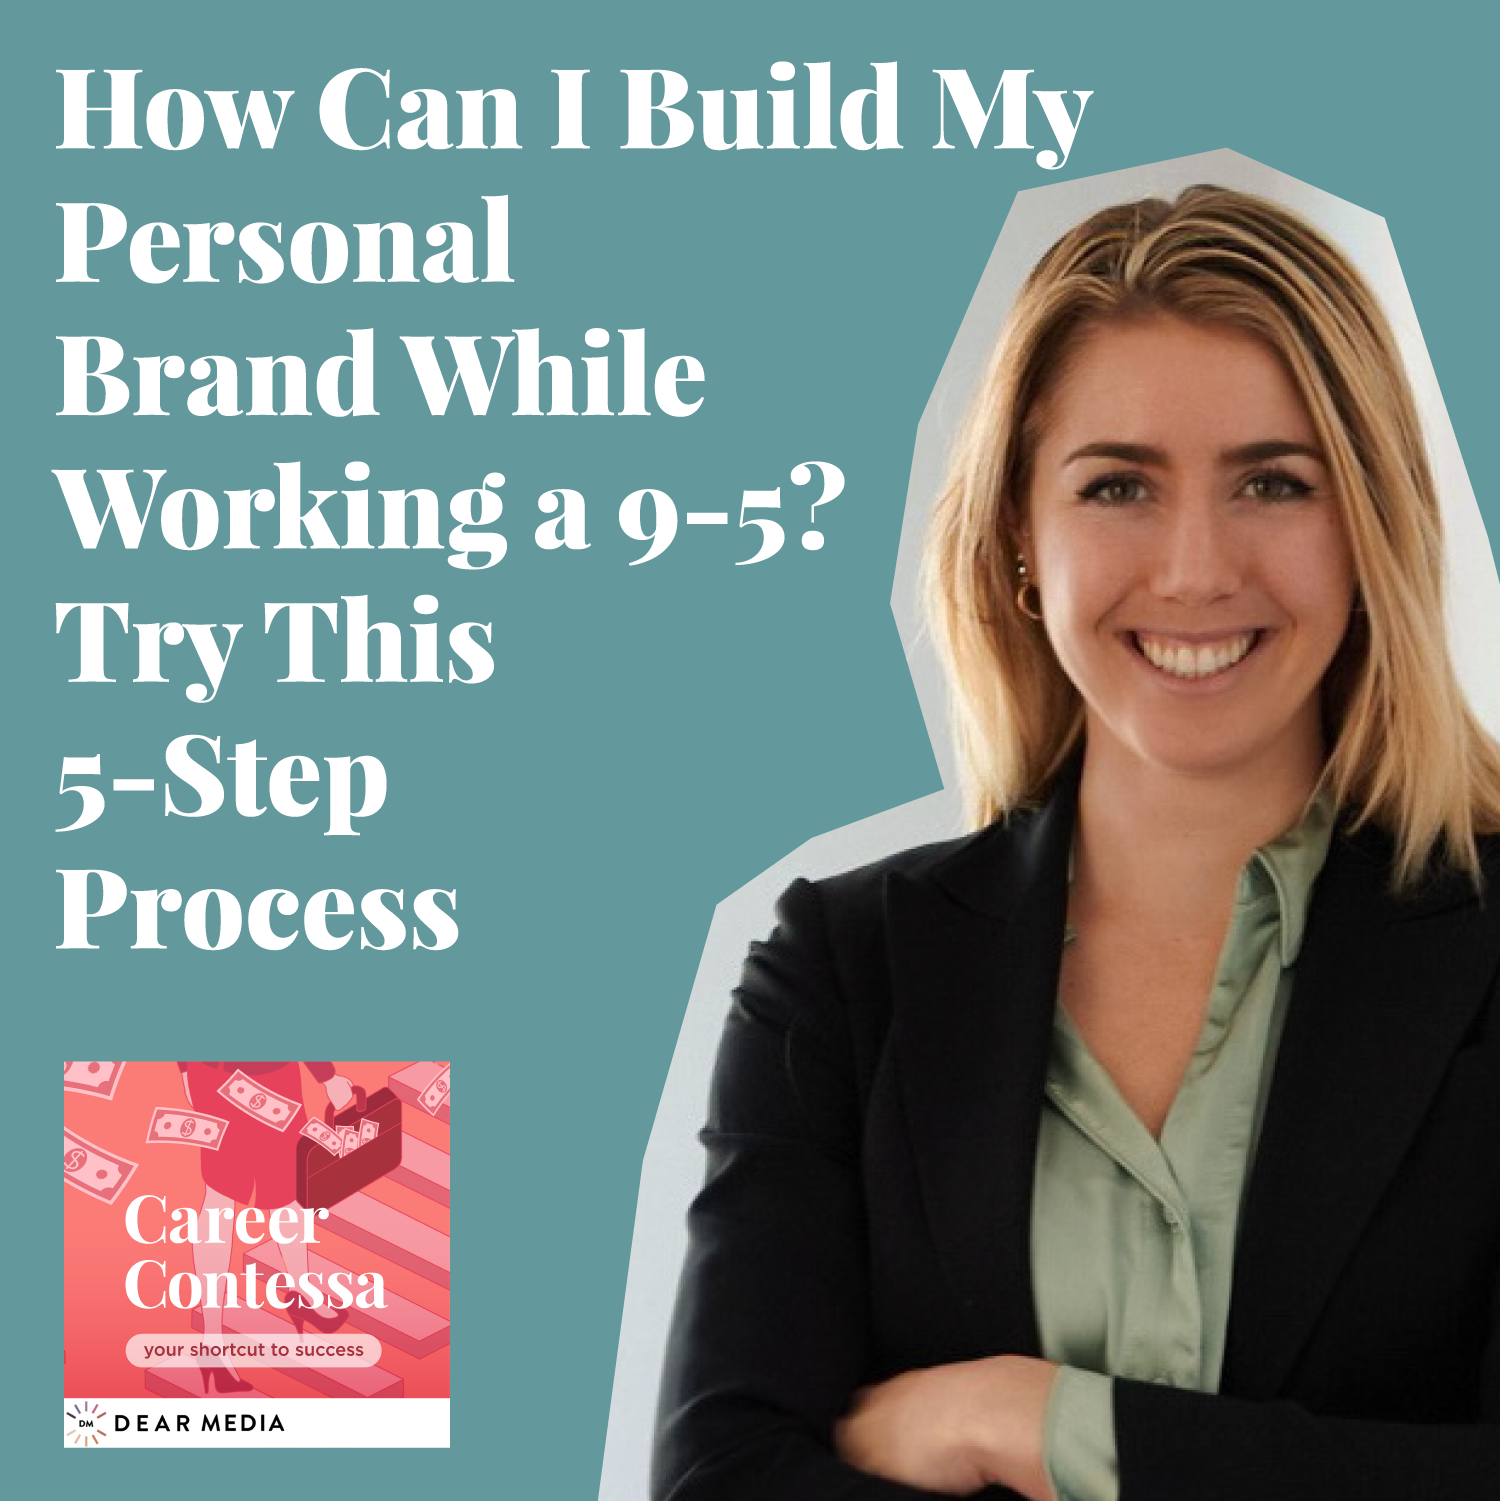 How Can I Build My Personal Brand While Working a 9-5? Try This Process Image